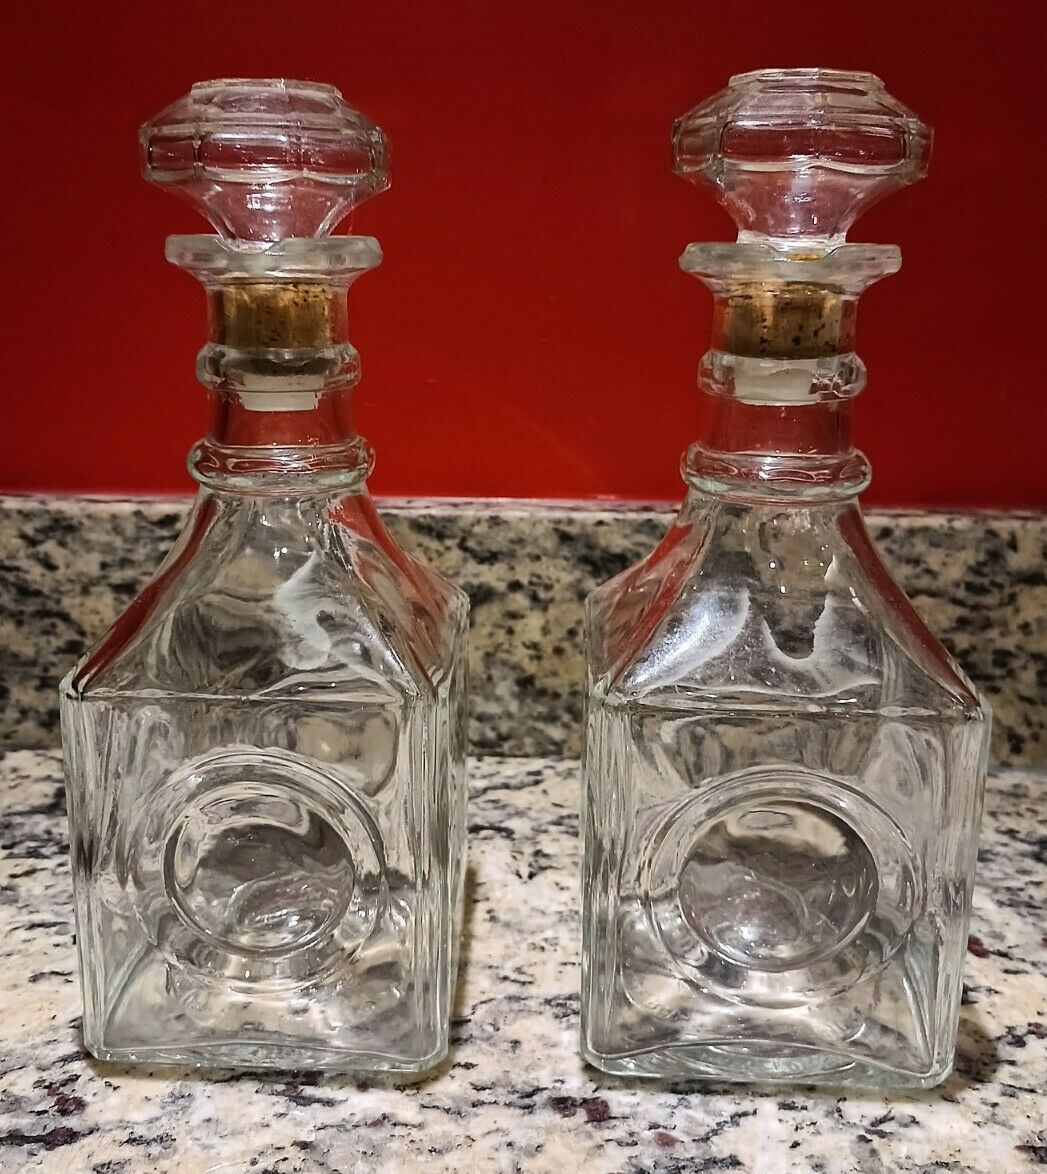 Lot of 2 Vintage matching VTG Bourbon scotch Whiskey Glass Decanters (Empty)